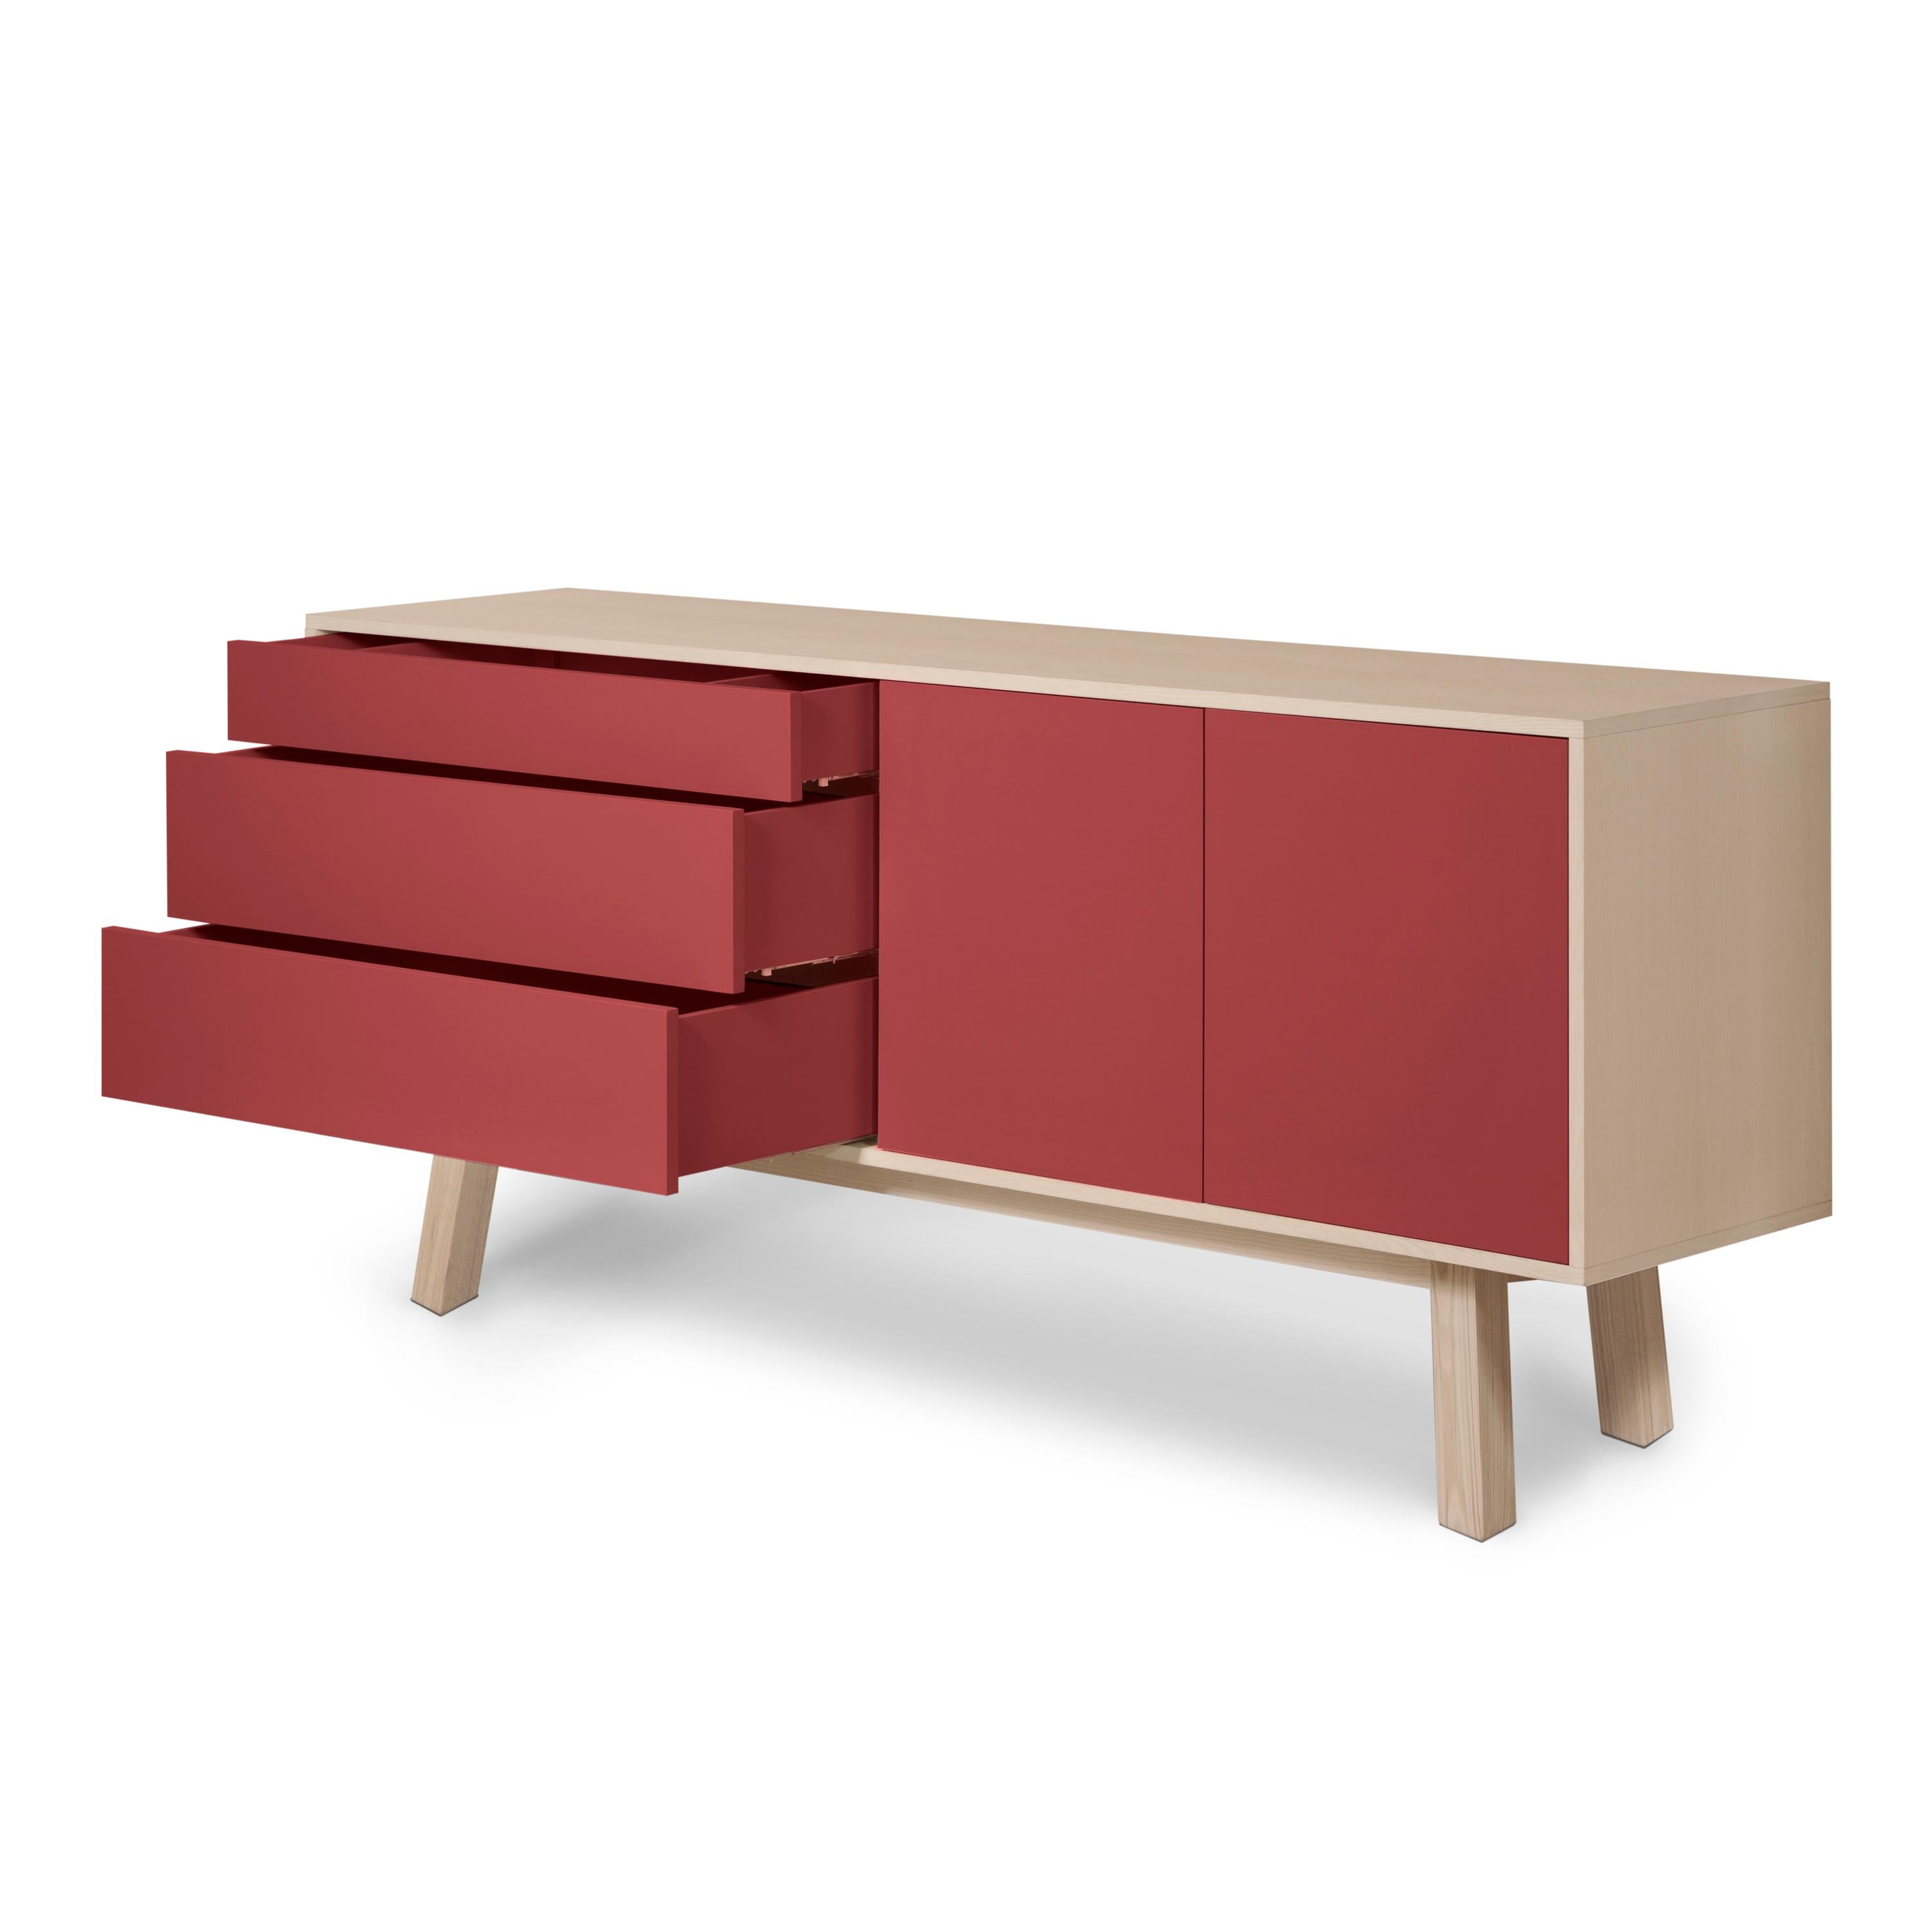 French Red Sideboard, scandianviand design Eric Gizard, Paris + 10 colours available For Sale